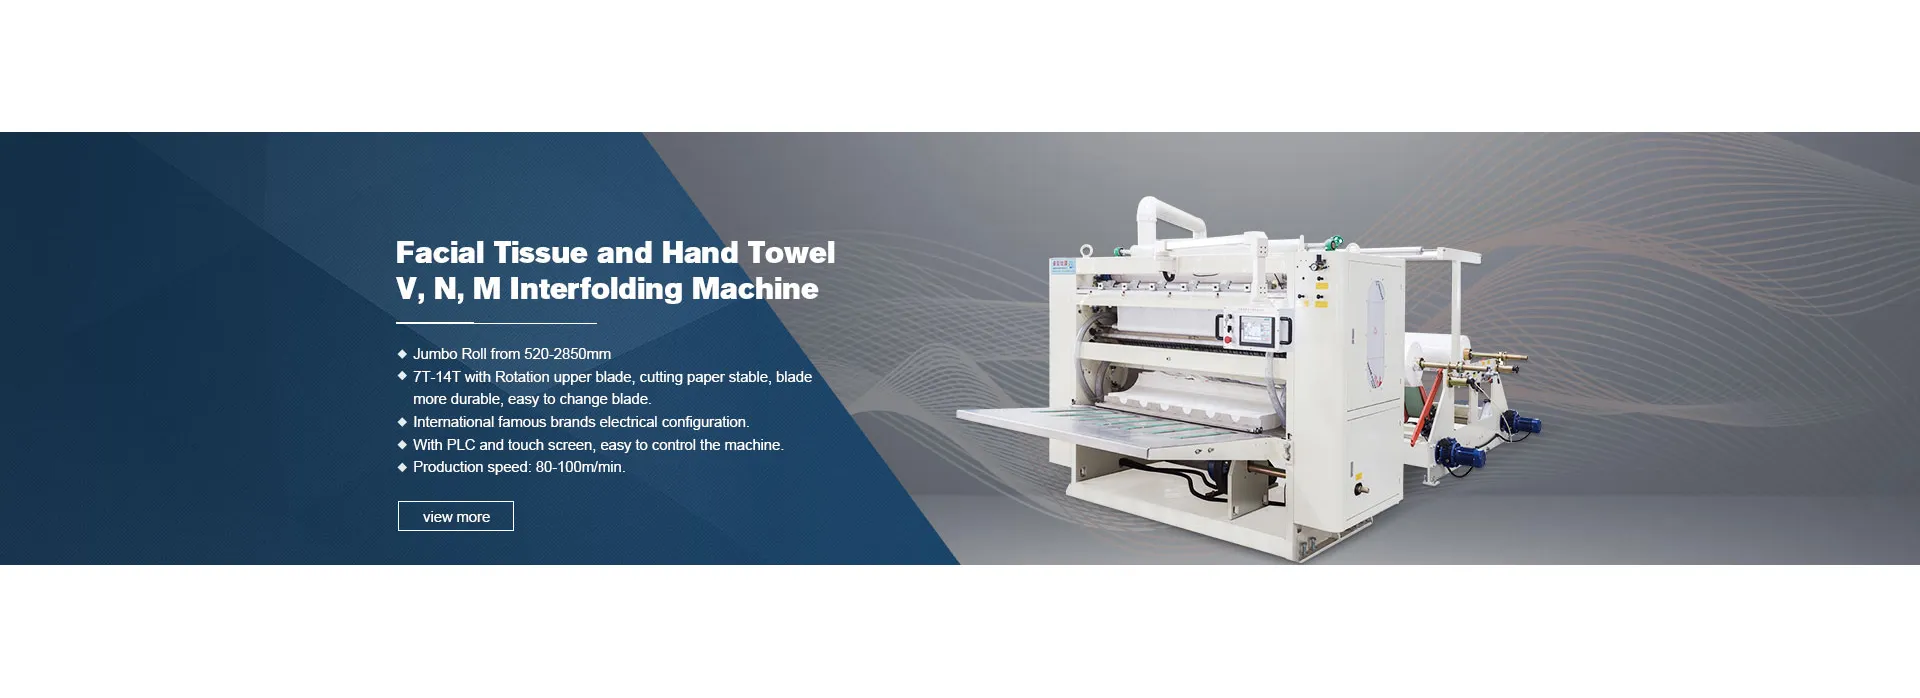 Facial Tissue and Hand Towel V, N, M Interfolding Machine